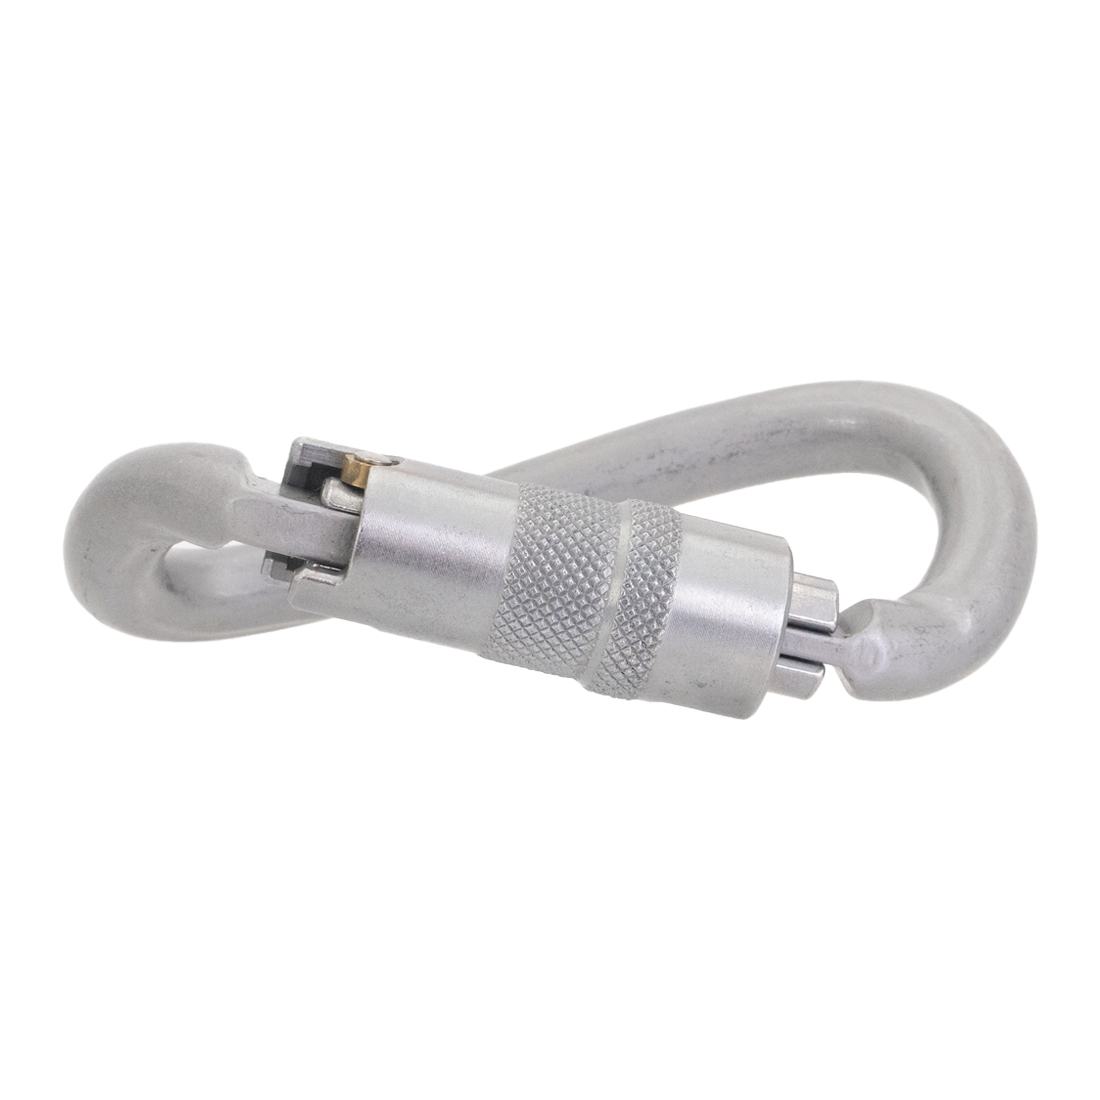 KONG DNA Carabiner - Ovalone Autoblock ANSI Side View